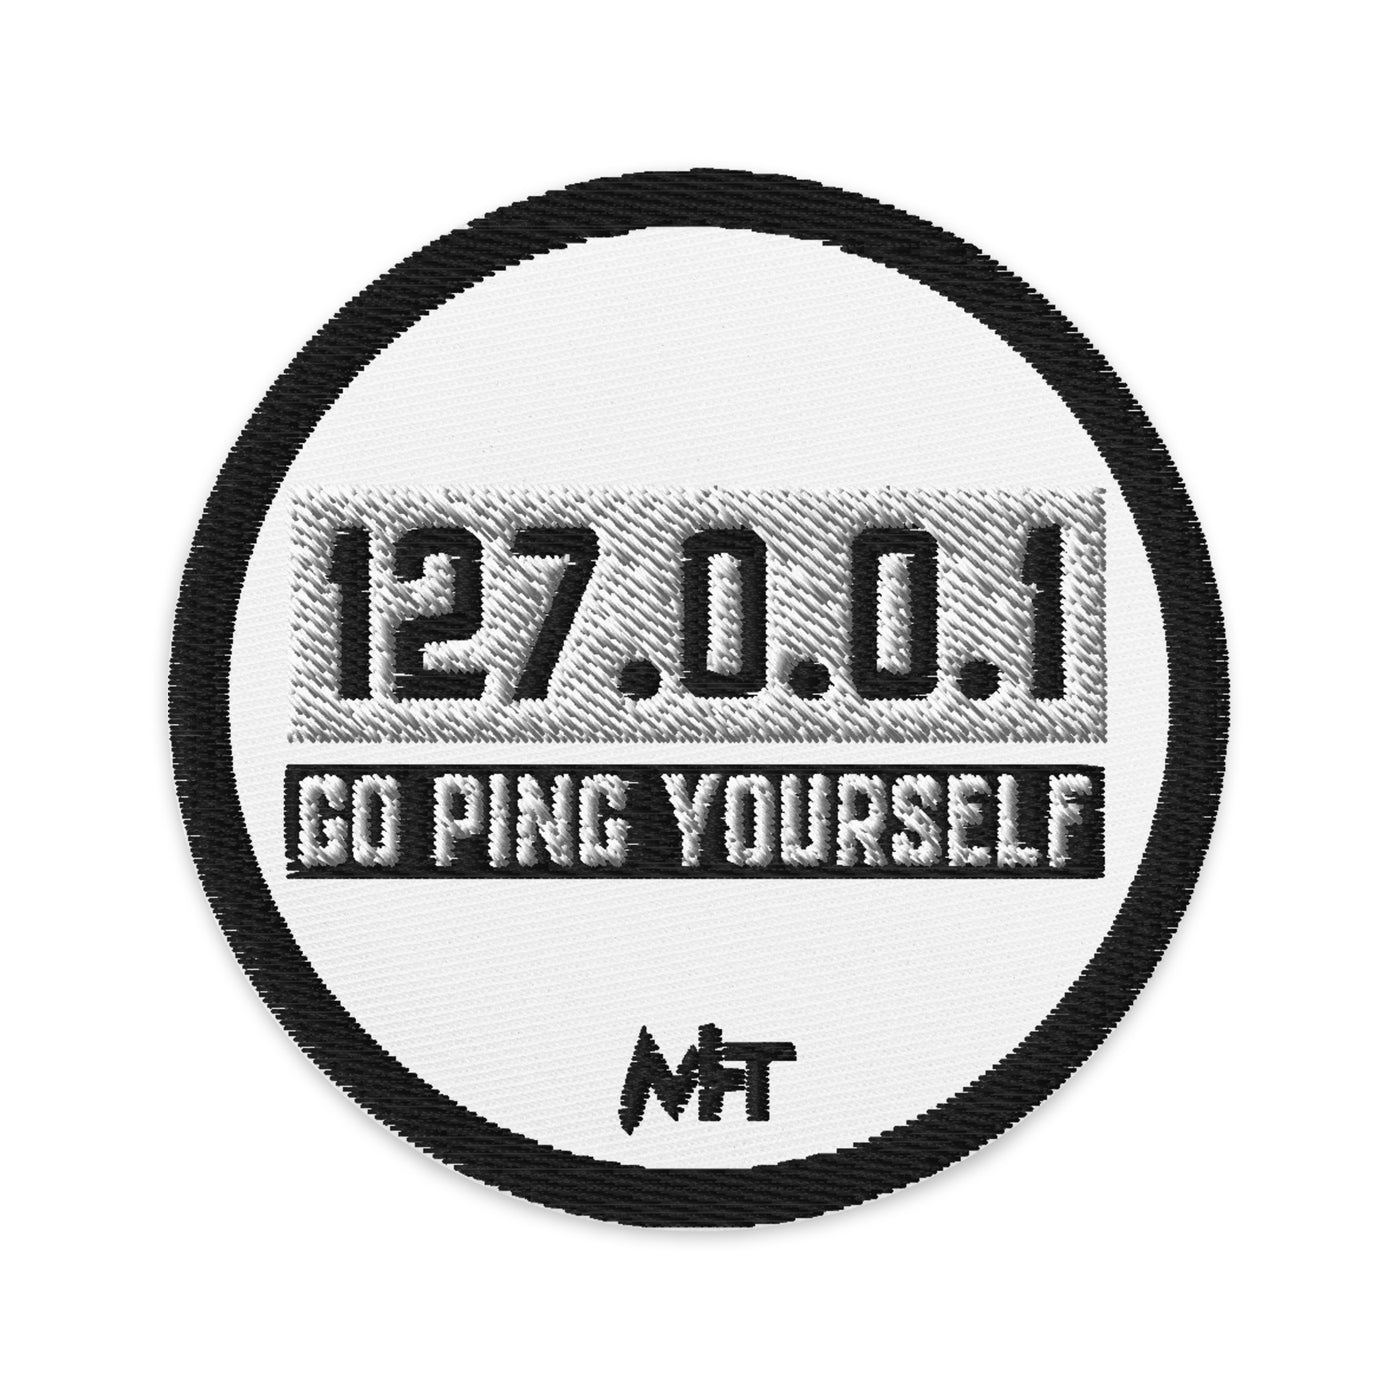 Go ping yourself - Embroidered patches